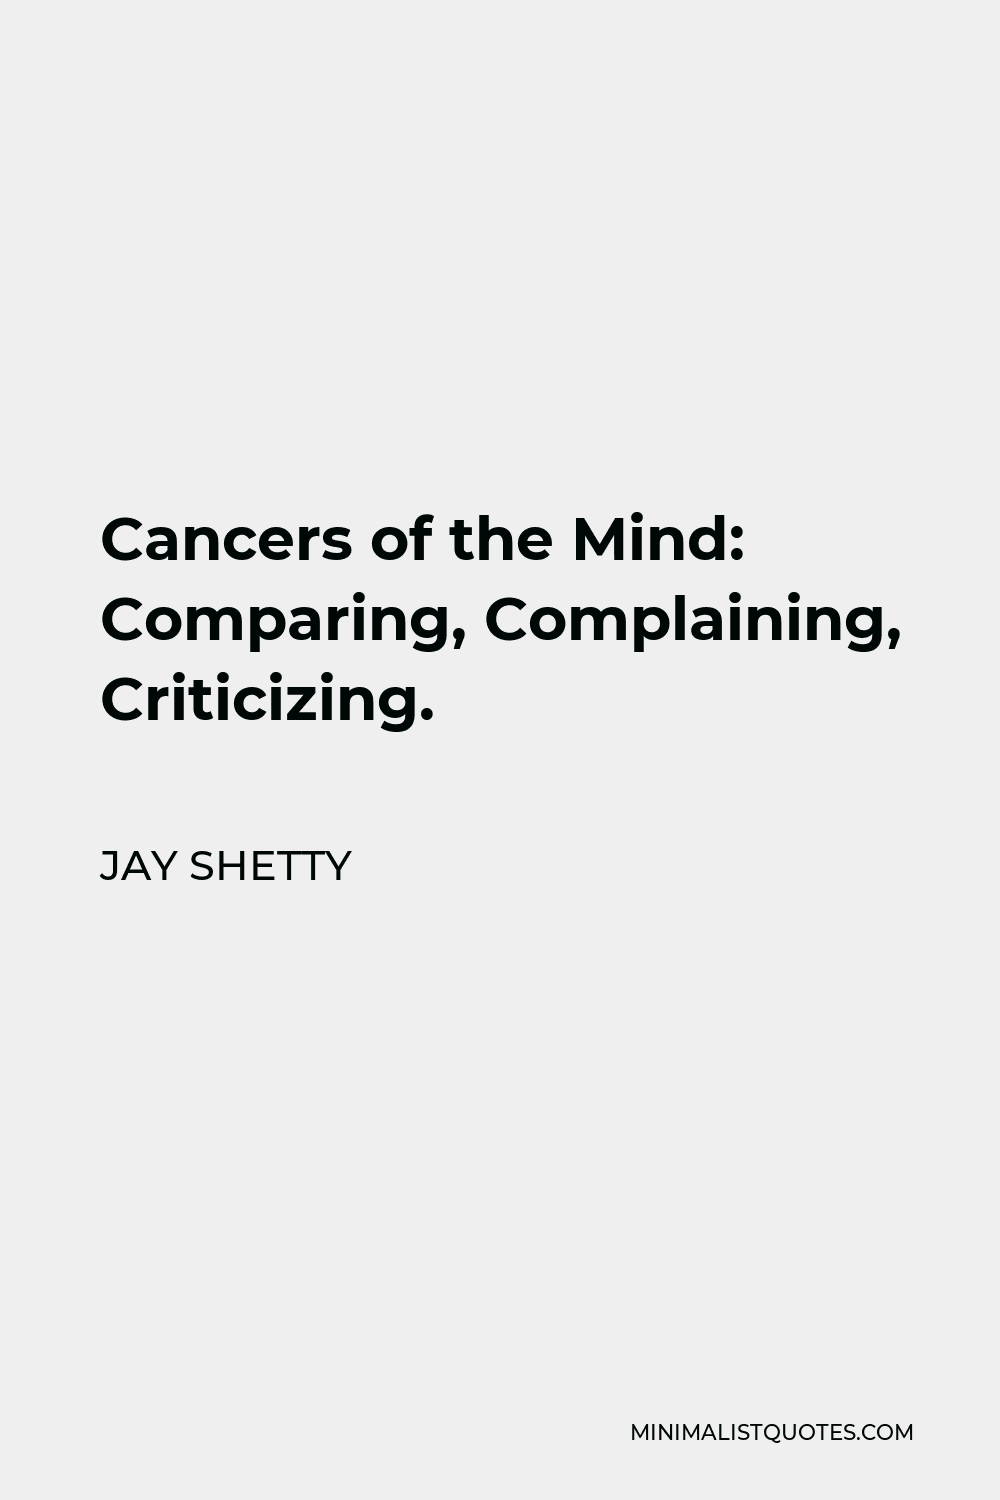 Jay Shetty Quote - Cancers of the Mind: Comparing, Complaining, Criticizing.